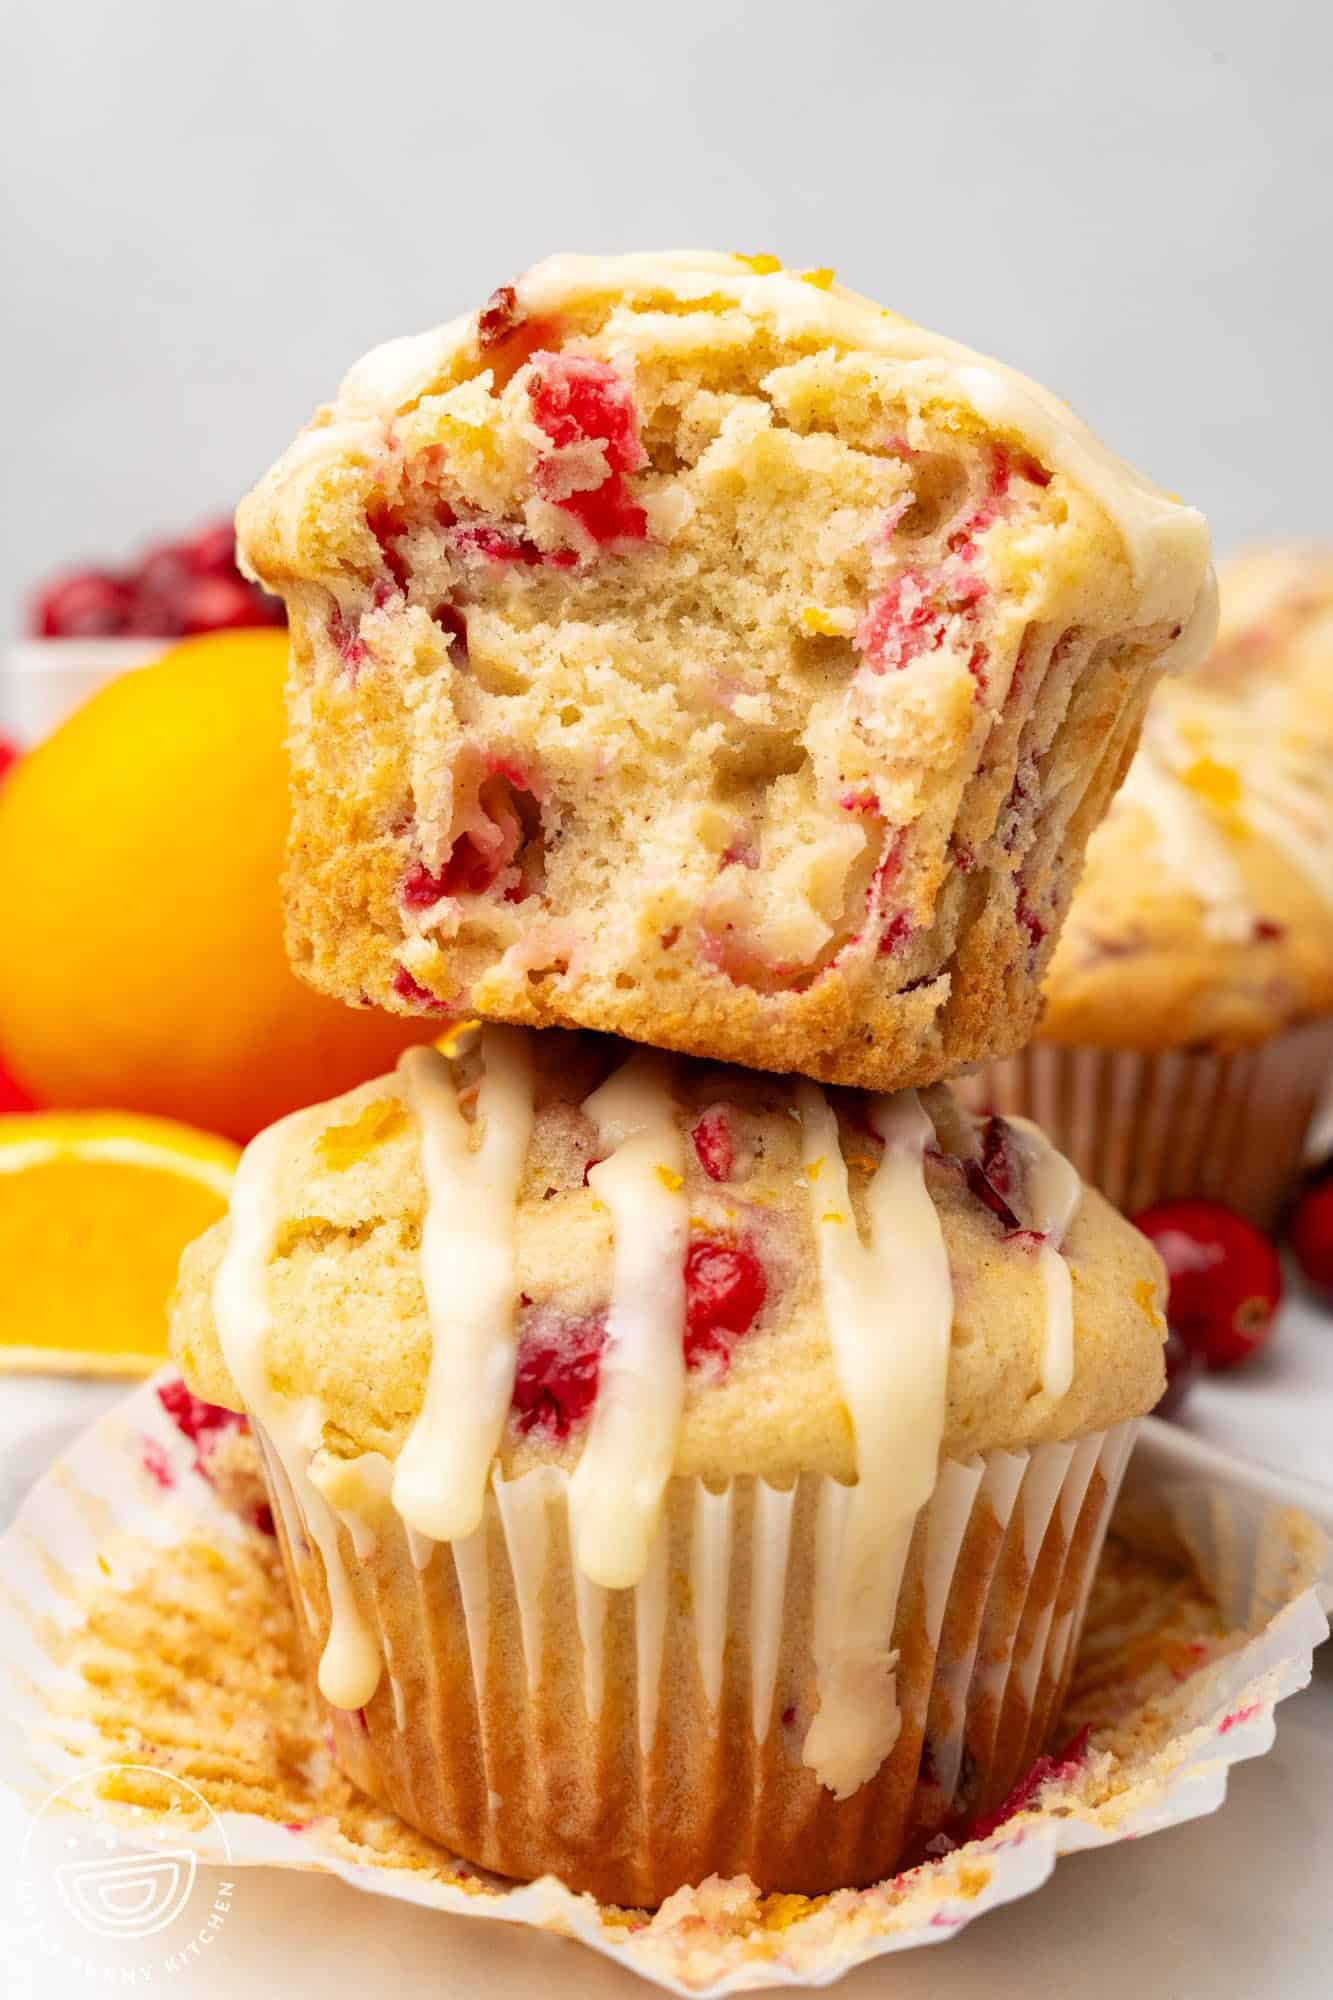 two homemade cranberry orange muffins stacked. The top one has had a bite taken to show the tender interior